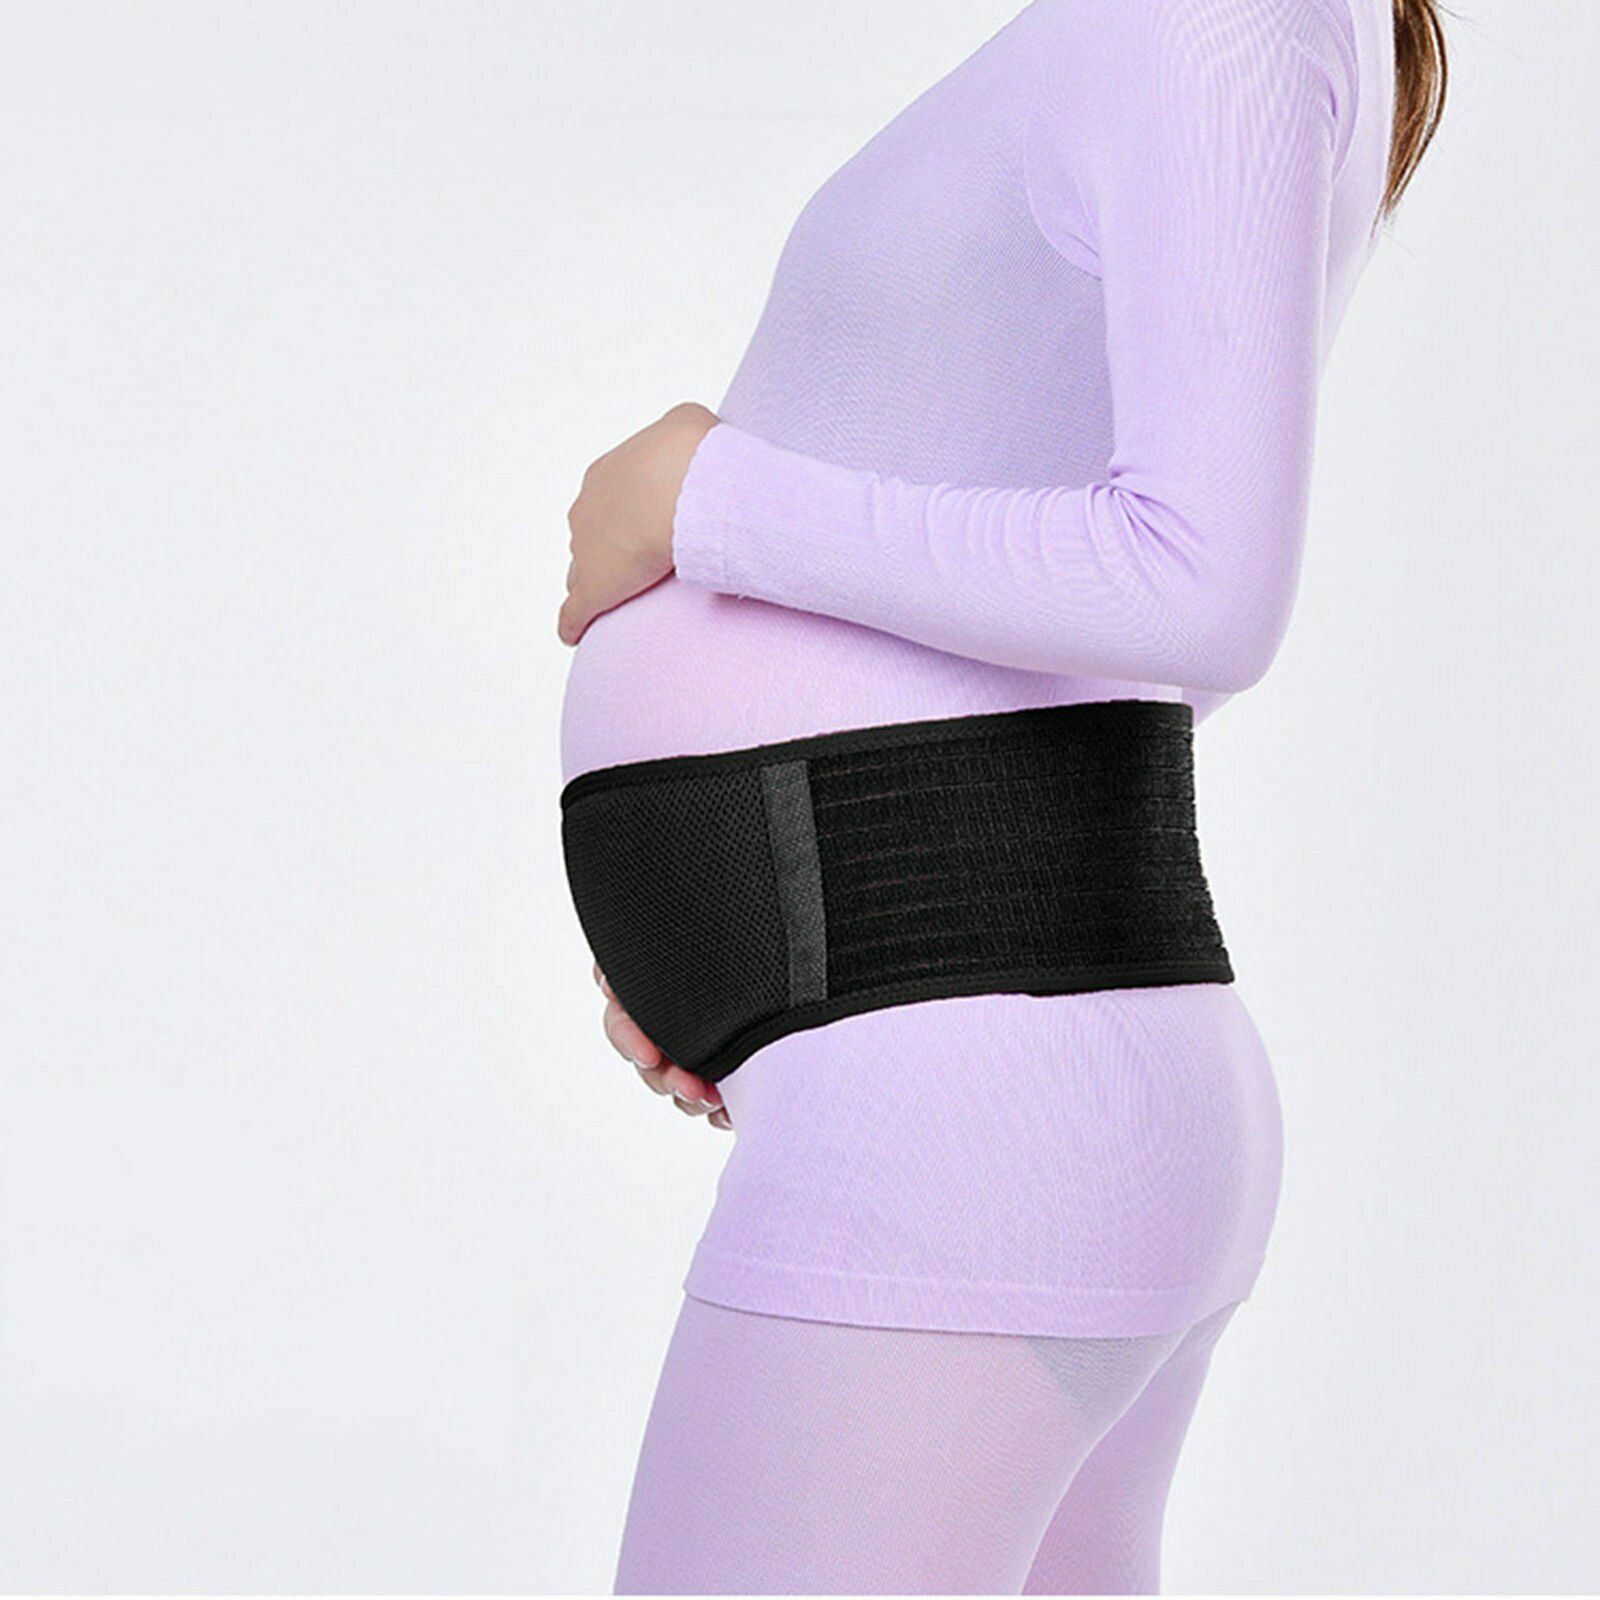 Pregnancy Belly Band - Breathable and Adjustable - Black - 